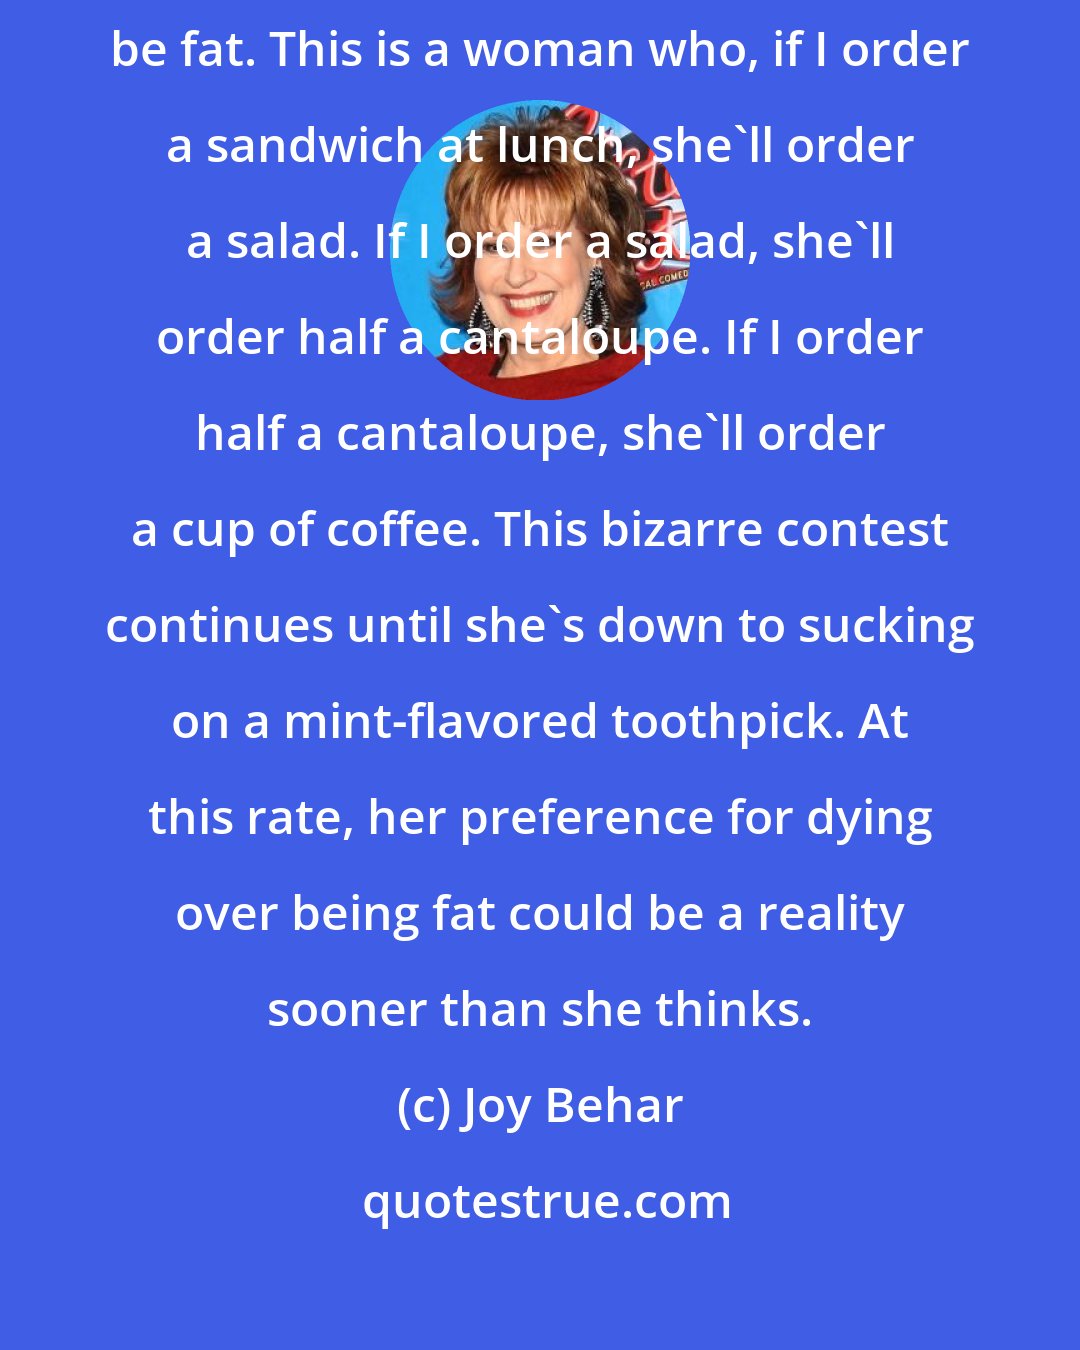 Joy Behar: I have a friend who actually told me that she'd rather be dead than be fat. This is a woman who, if I order a sandwich at lunch, she'll order a salad. If I order a salad, she'll order half a cantaloupe. If I order half a cantaloupe, she'll order a cup of coffee. This bizarre contest continues until she's down to sucking on a mint-flavored toothpick. At this rate, her preference for dying over being fat could be a reality sooner than she thinks.